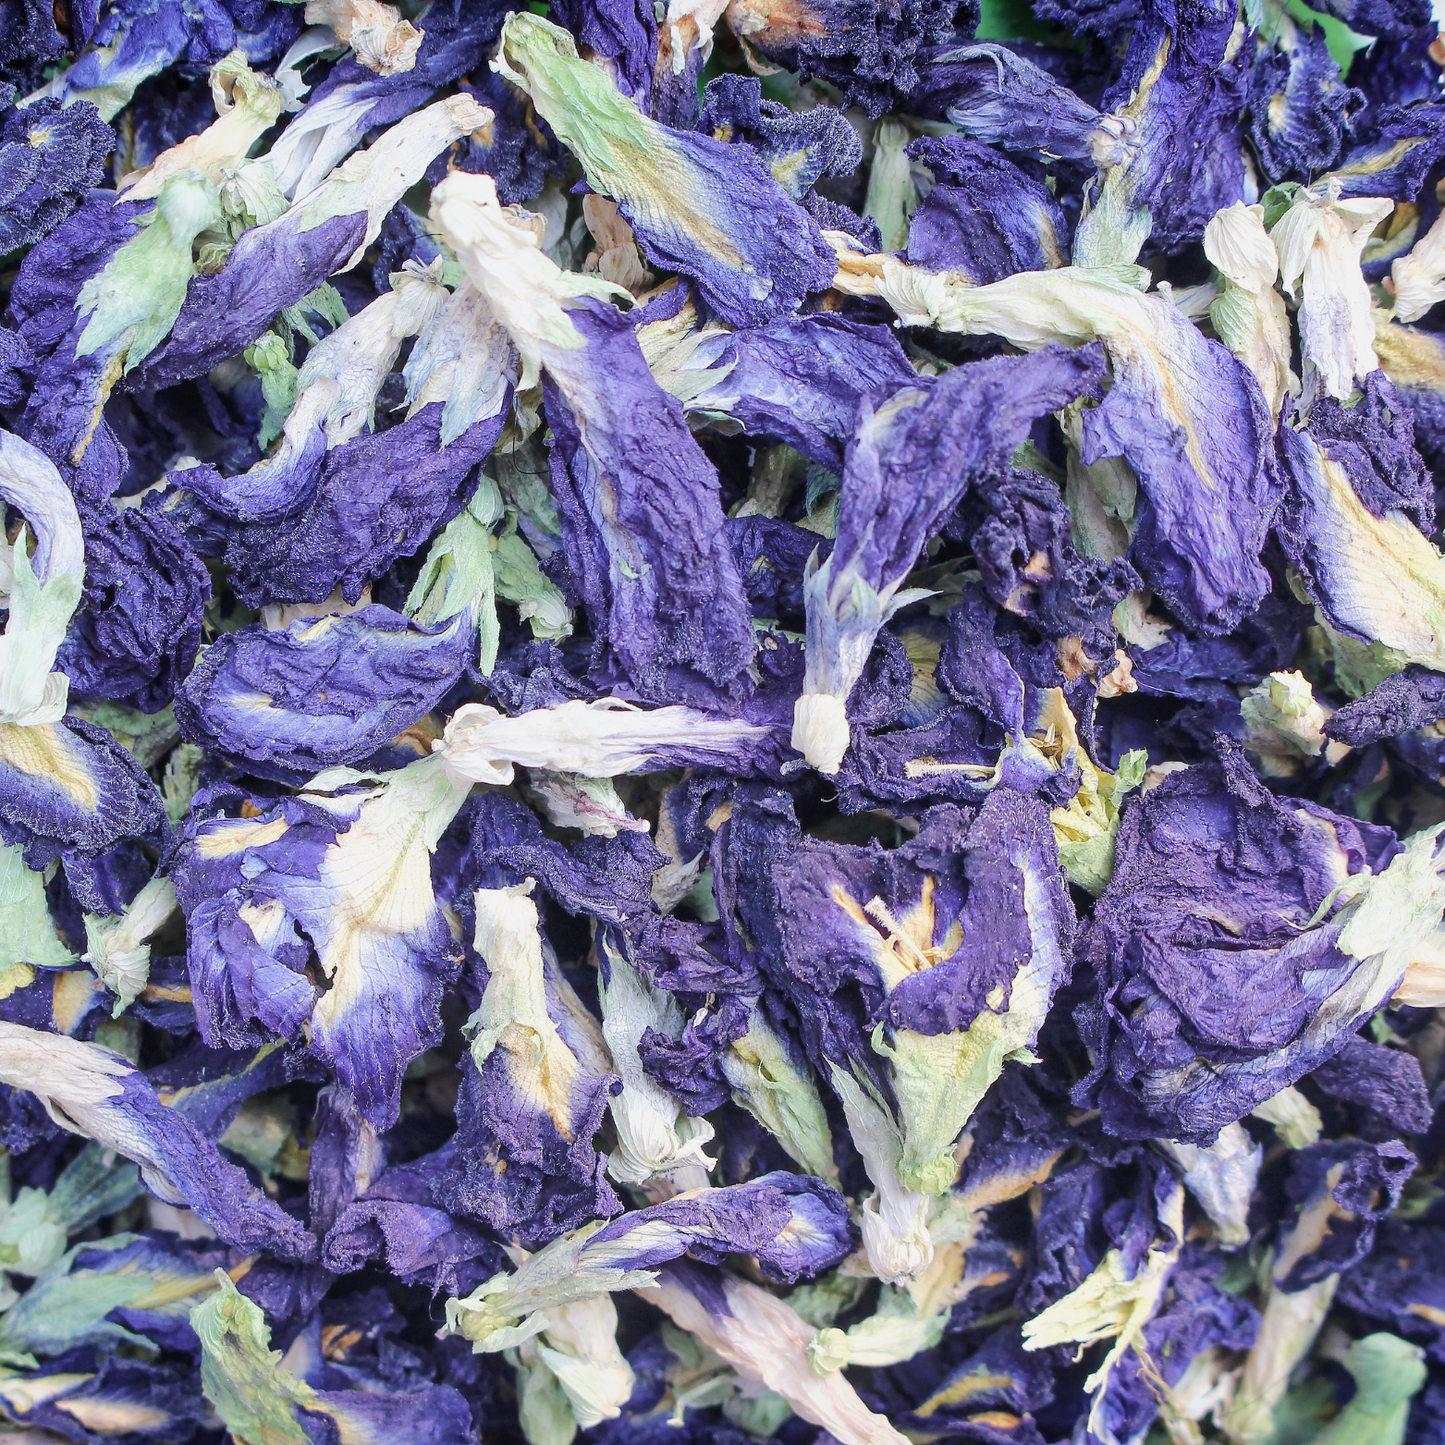 Butterfly Pea Flower Loose Leaf Herbal Blue Colored Tea, Add Lime to Turn Purple!